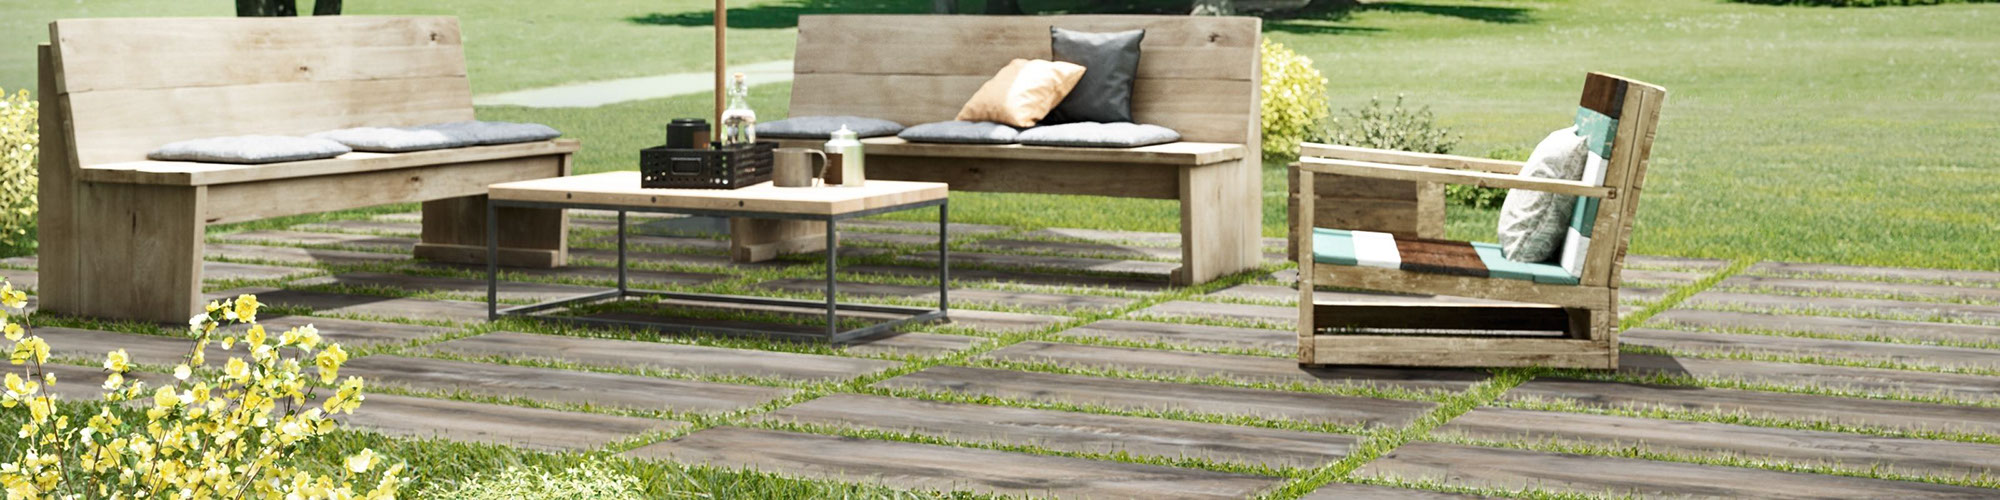 Lawn furniture on 16" x 48" 2 centimeter porcelain pavers that look like seasoned wood, set in green grass.